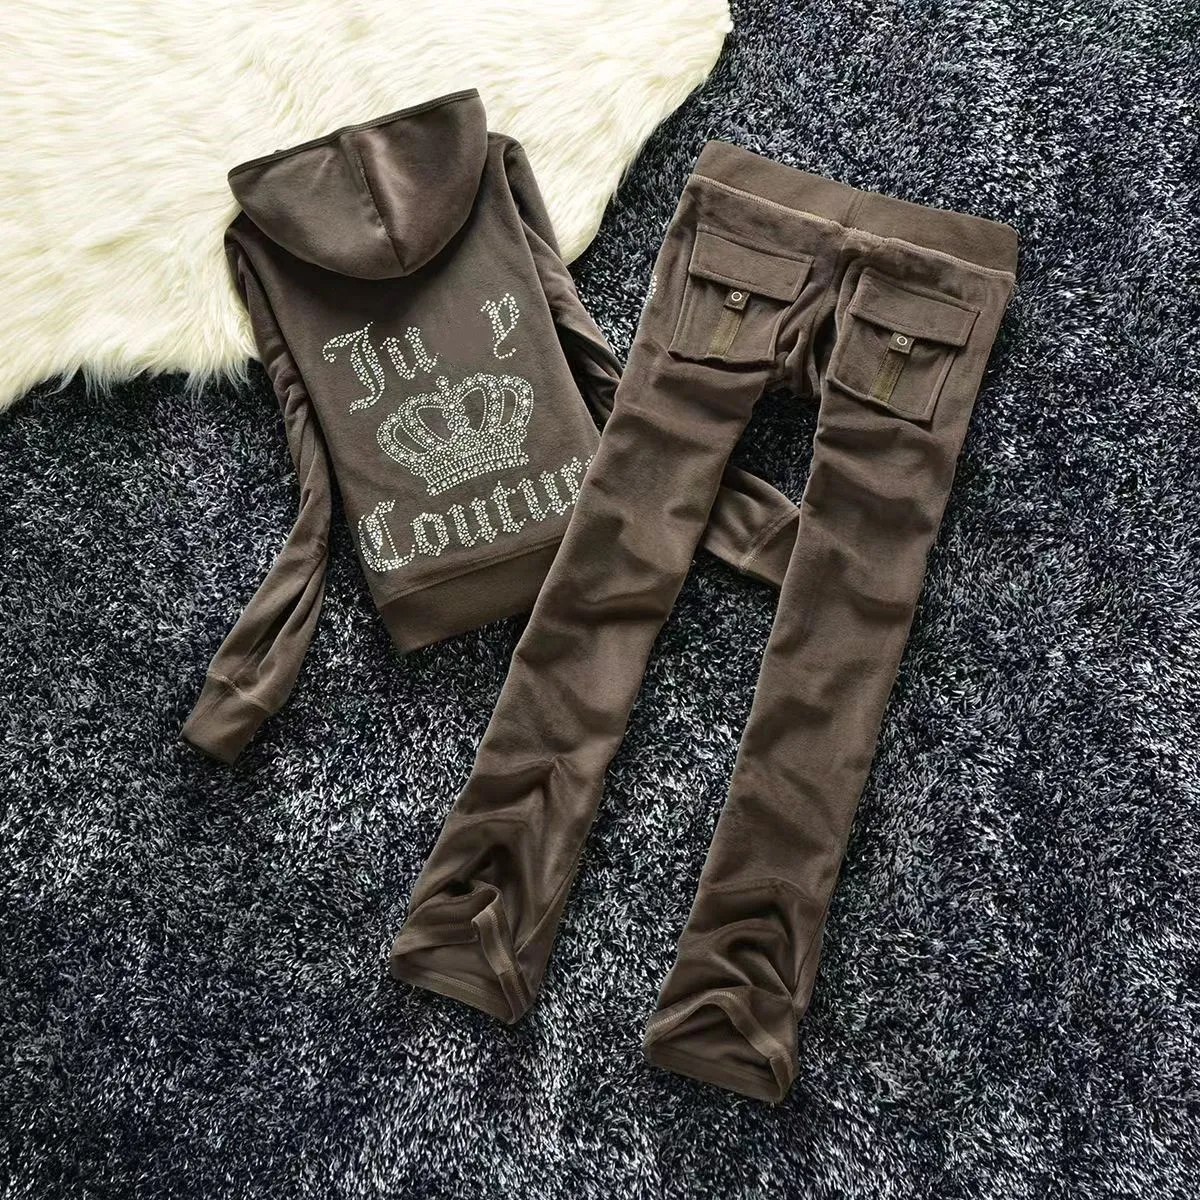 Women's Two Piece Pants Velvet Juicy Tracksuit Women Coutoure Set Track Suit Couture Juciy Coture Sweatsuits letters hooded hoodie loose fitting designer outfit c26